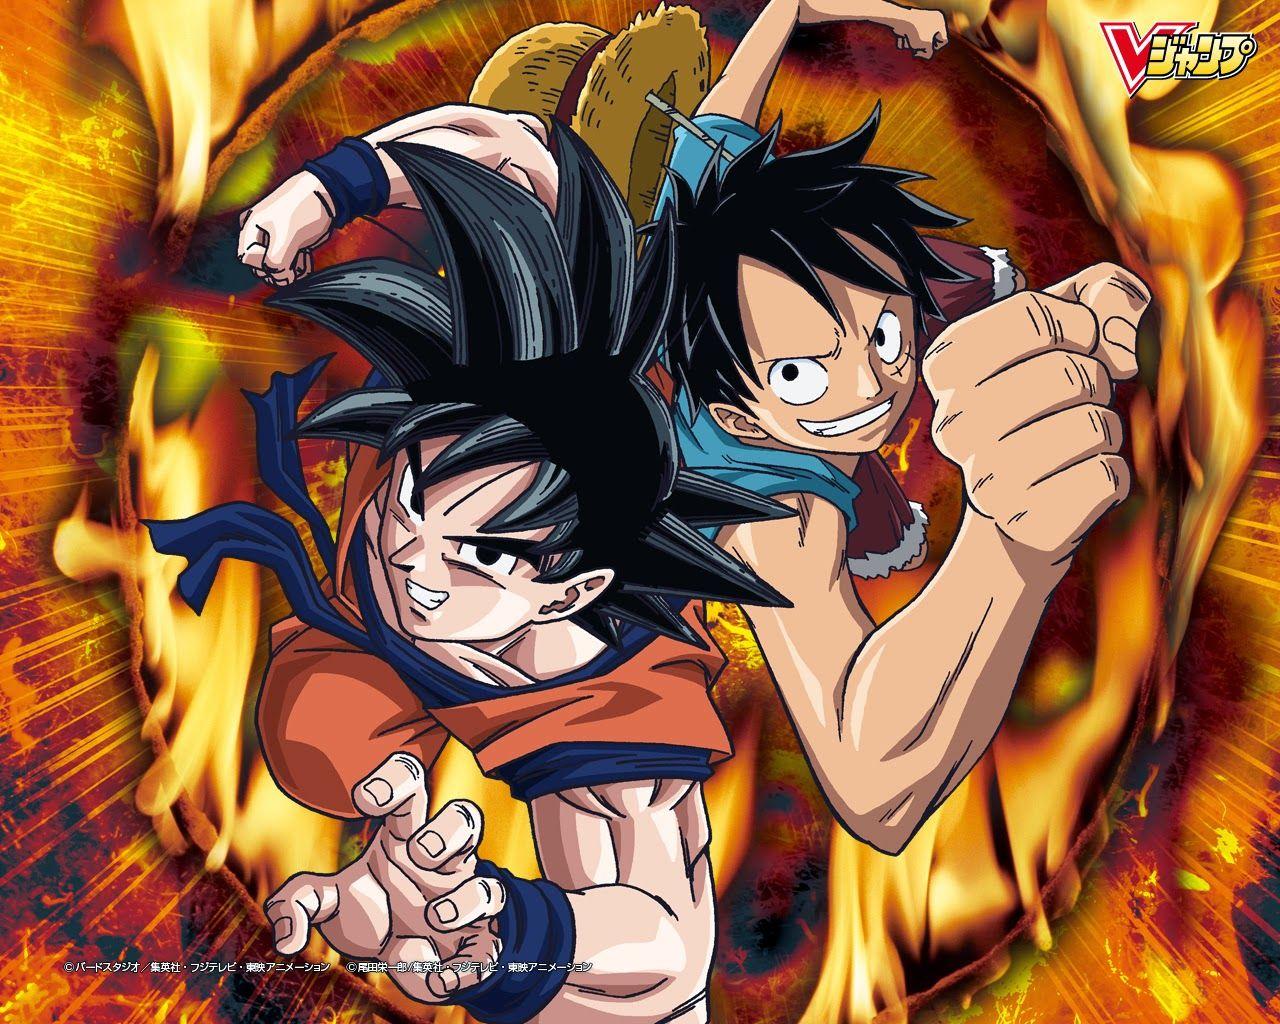 HD Wallpaper: Goku and Luffy One Piece Wallpaper Free For PC wallpaper